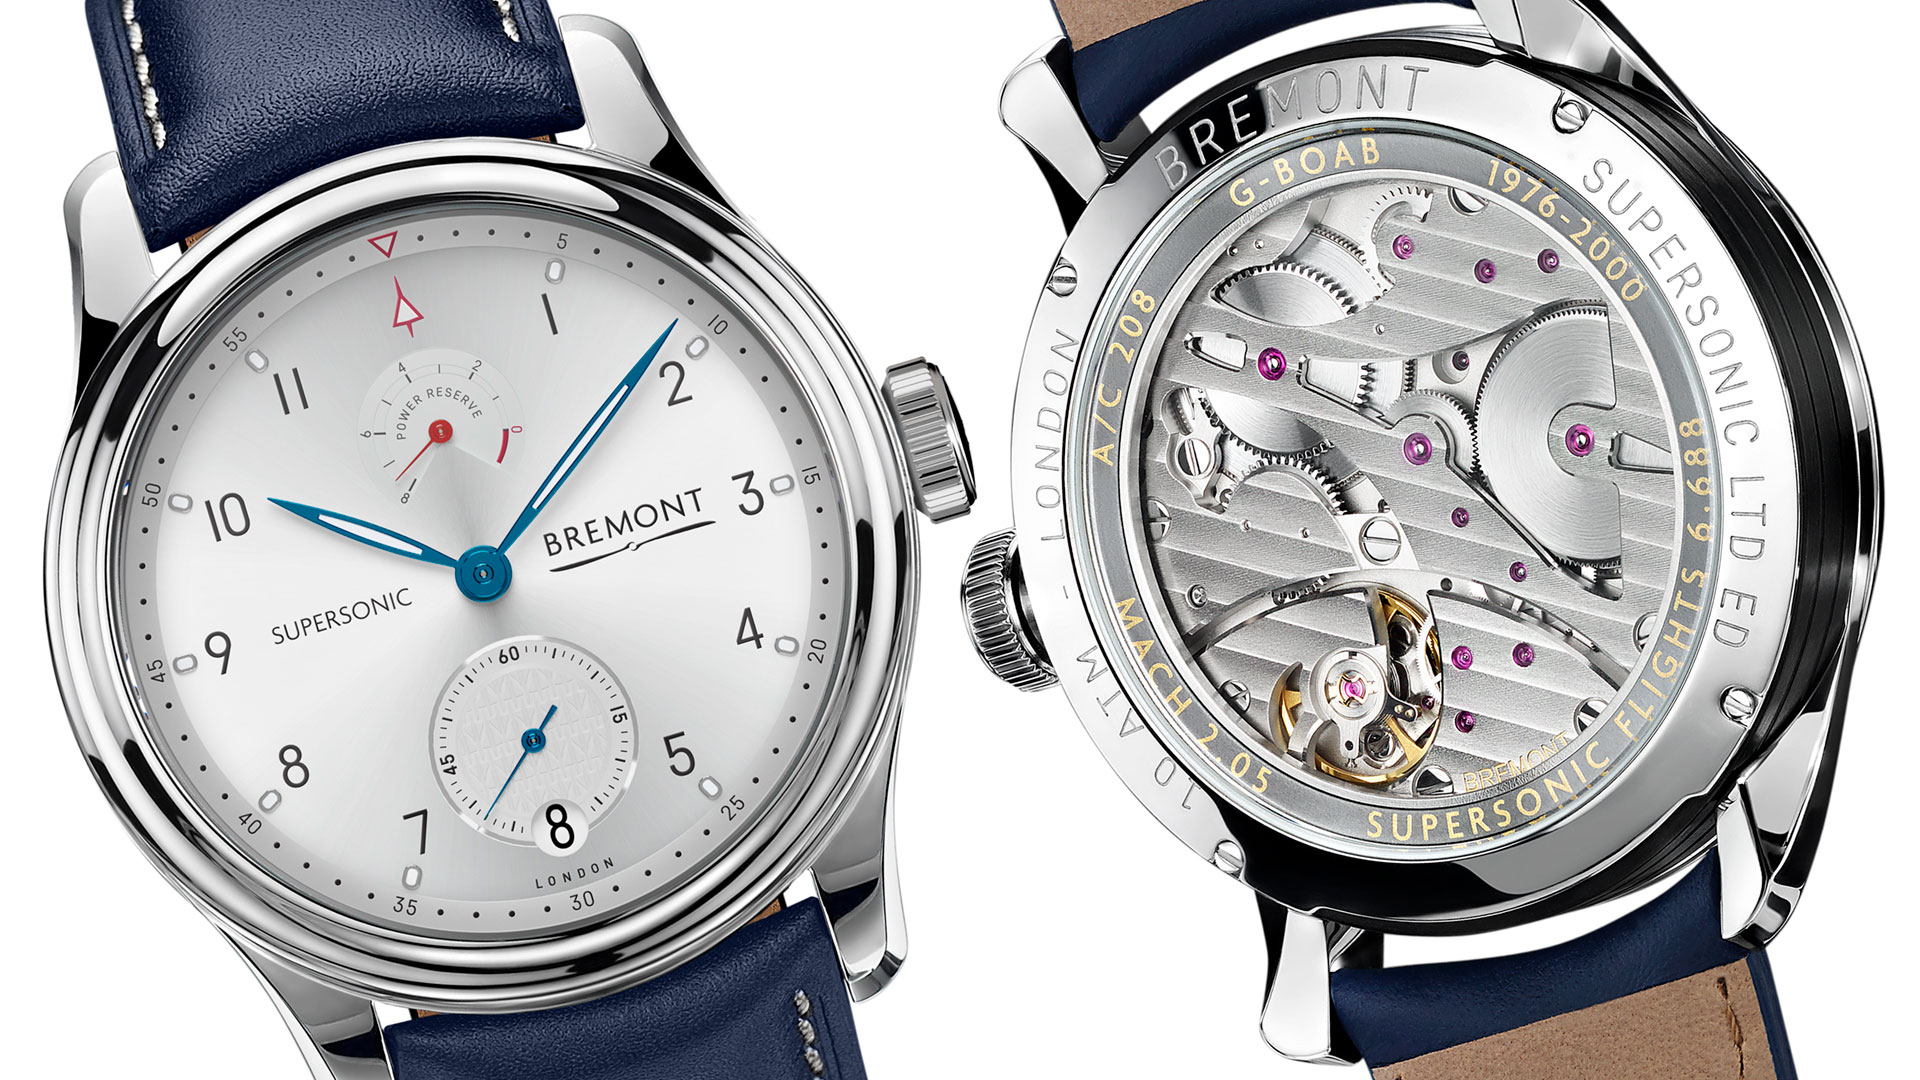 Bremont Supersonic Limited Edition Watch